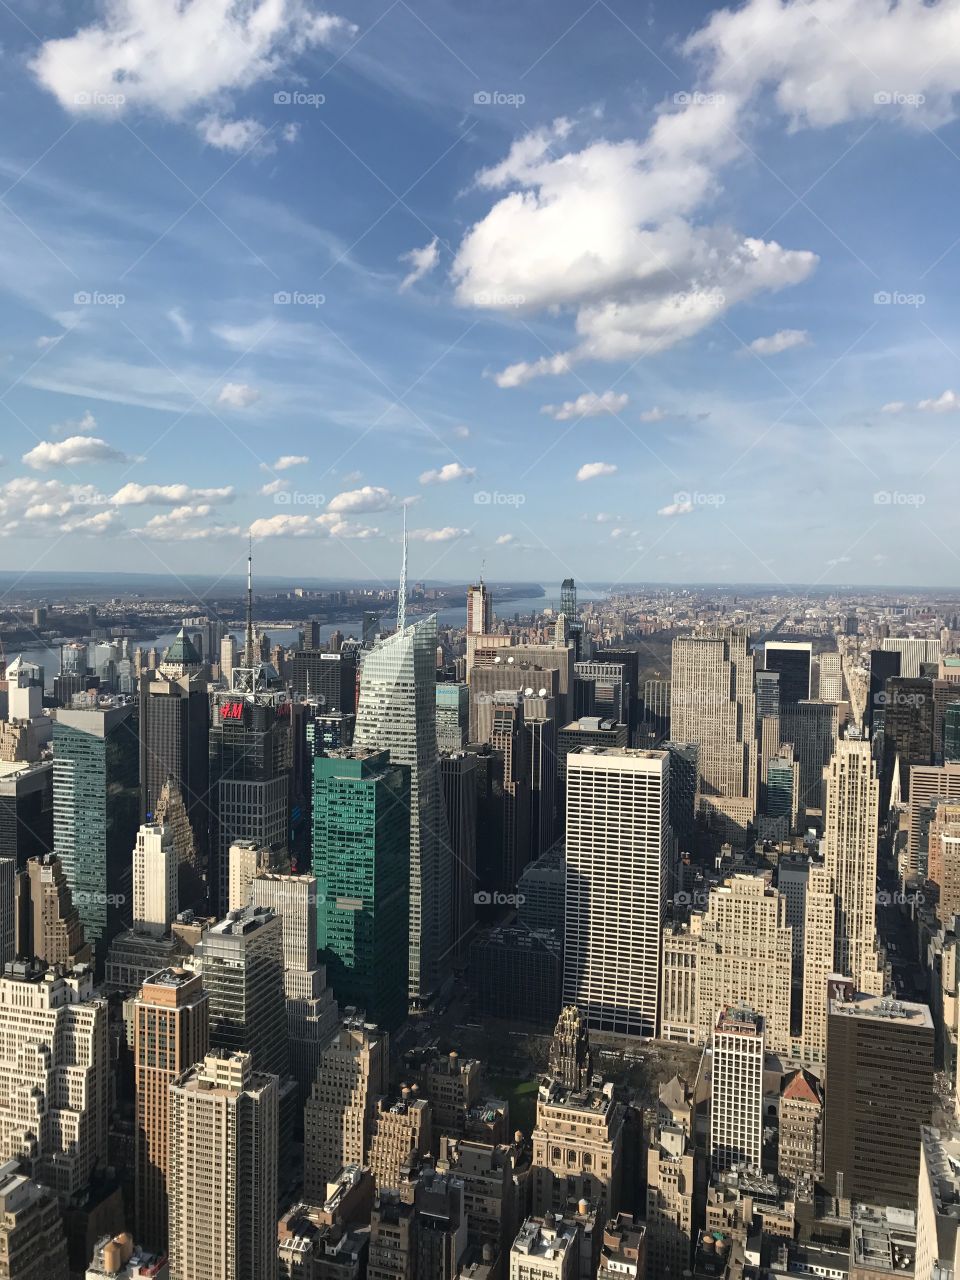 Empire State Building, view from the top